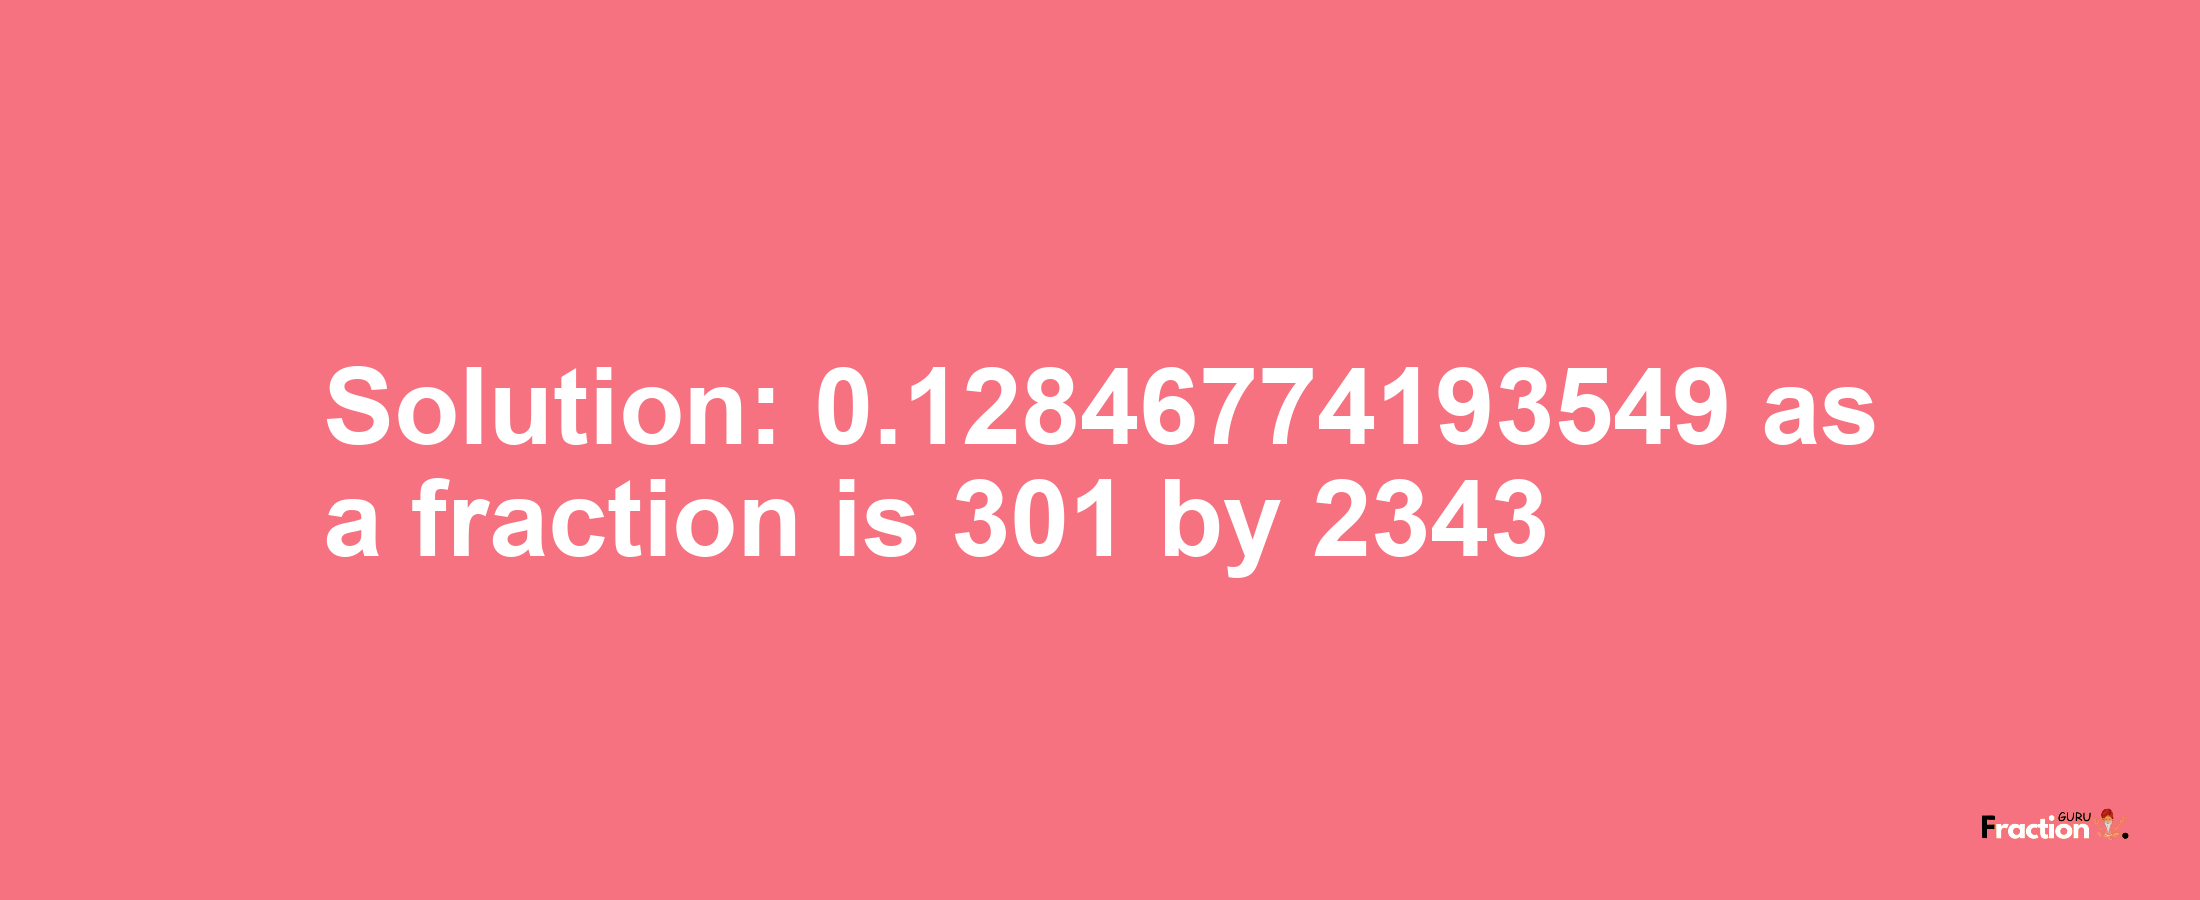 Solution:0.12846774193549 as a fraction is 301/2343